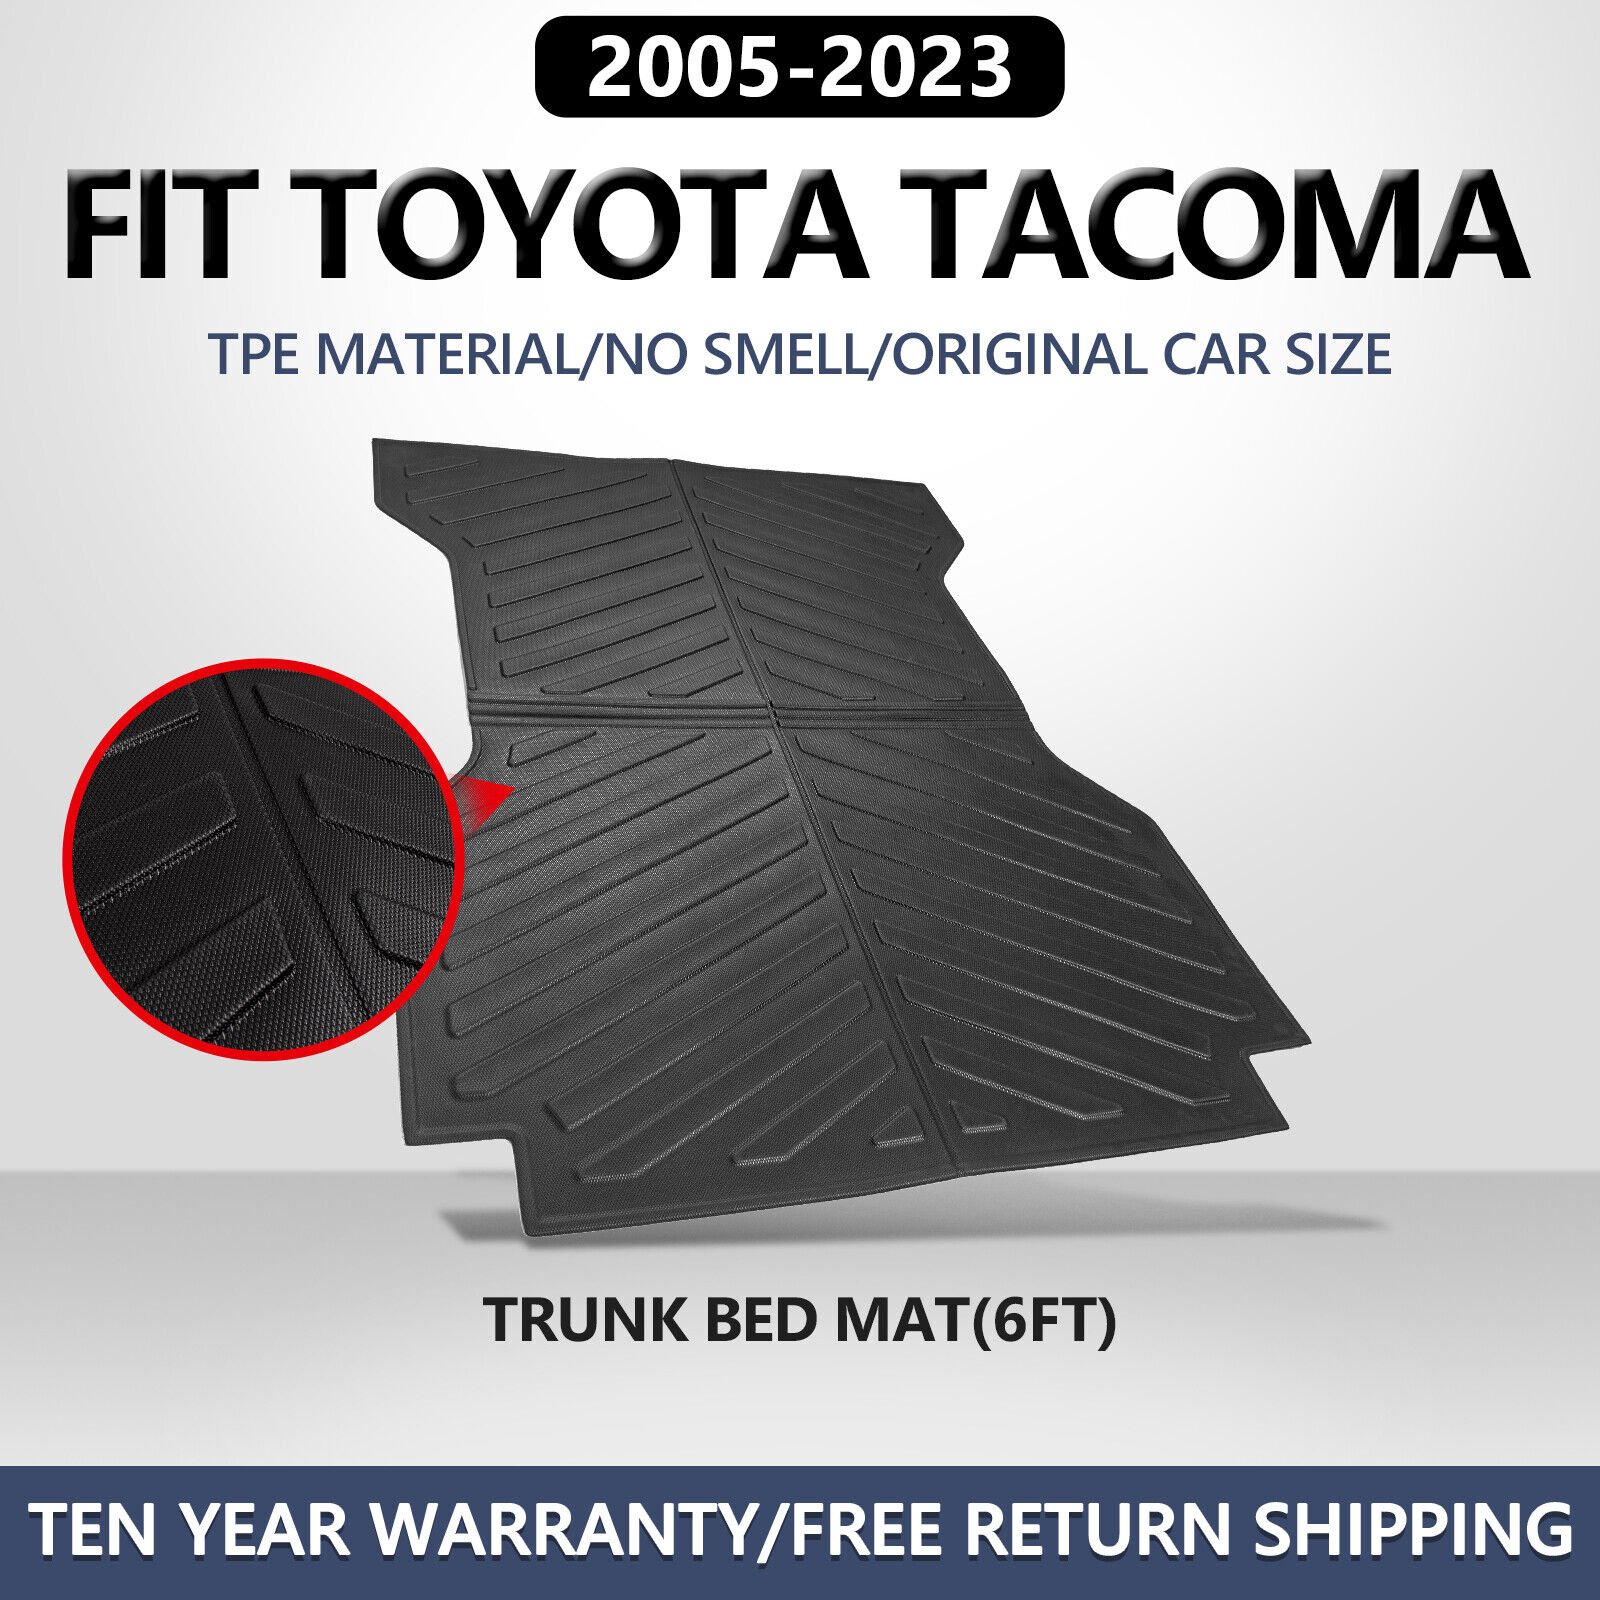 Bed Mats Trunk Cargo Mat Bed Liners For 2005-2023 Toyota Tacoma Anti-Slip TPE